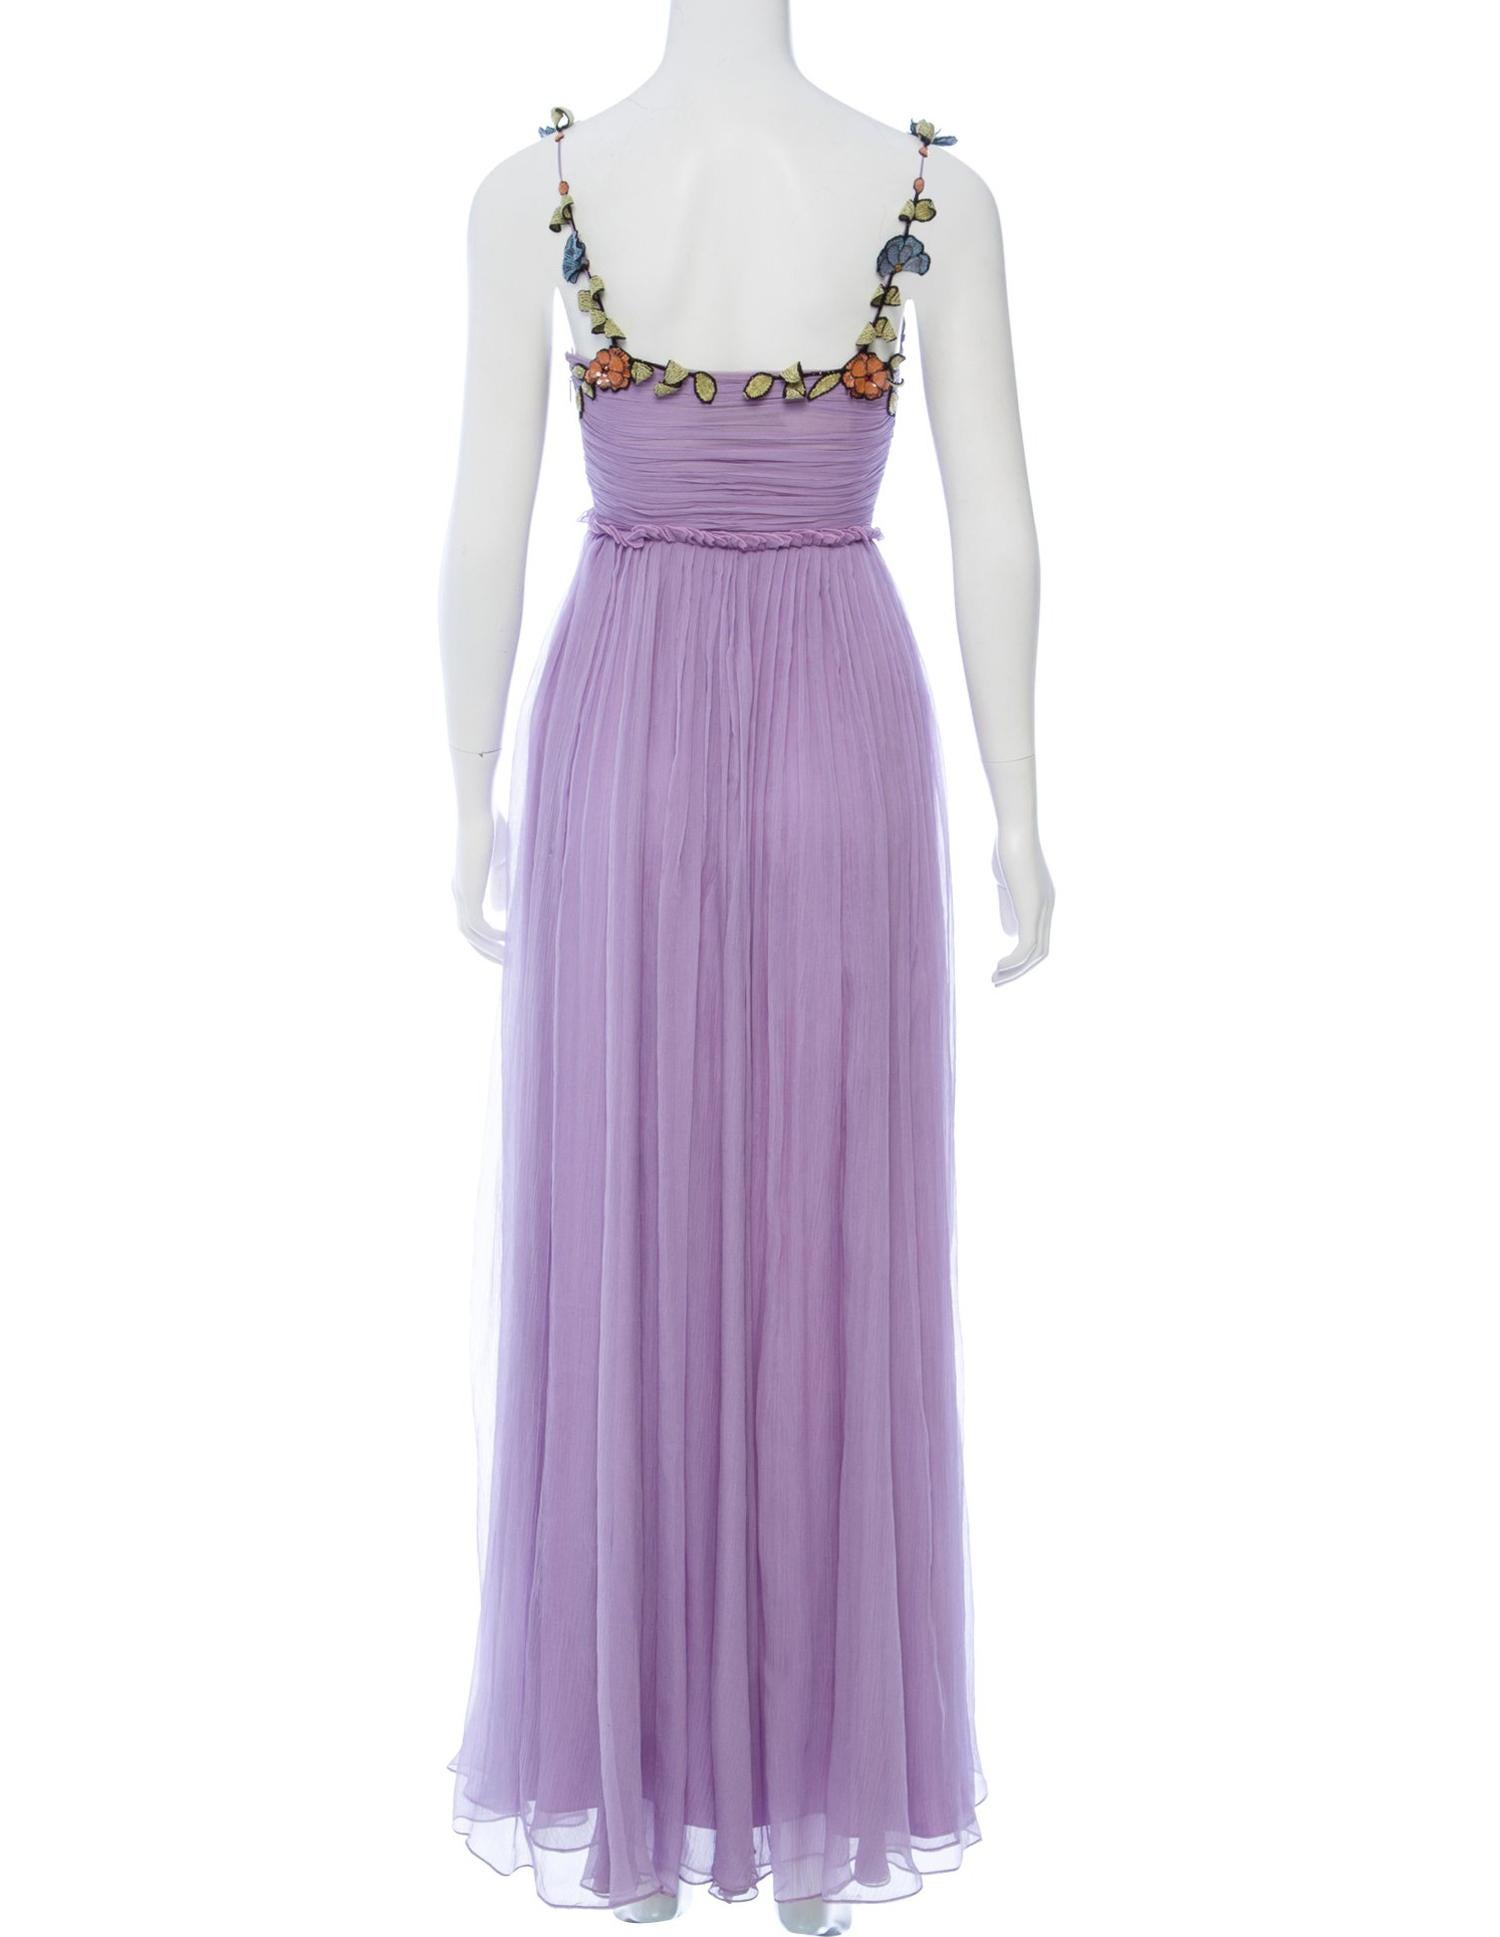 New Gucci Silk Embroidered Lavender Dress Gown Worn by Alessandra Ambrosio It 42 3